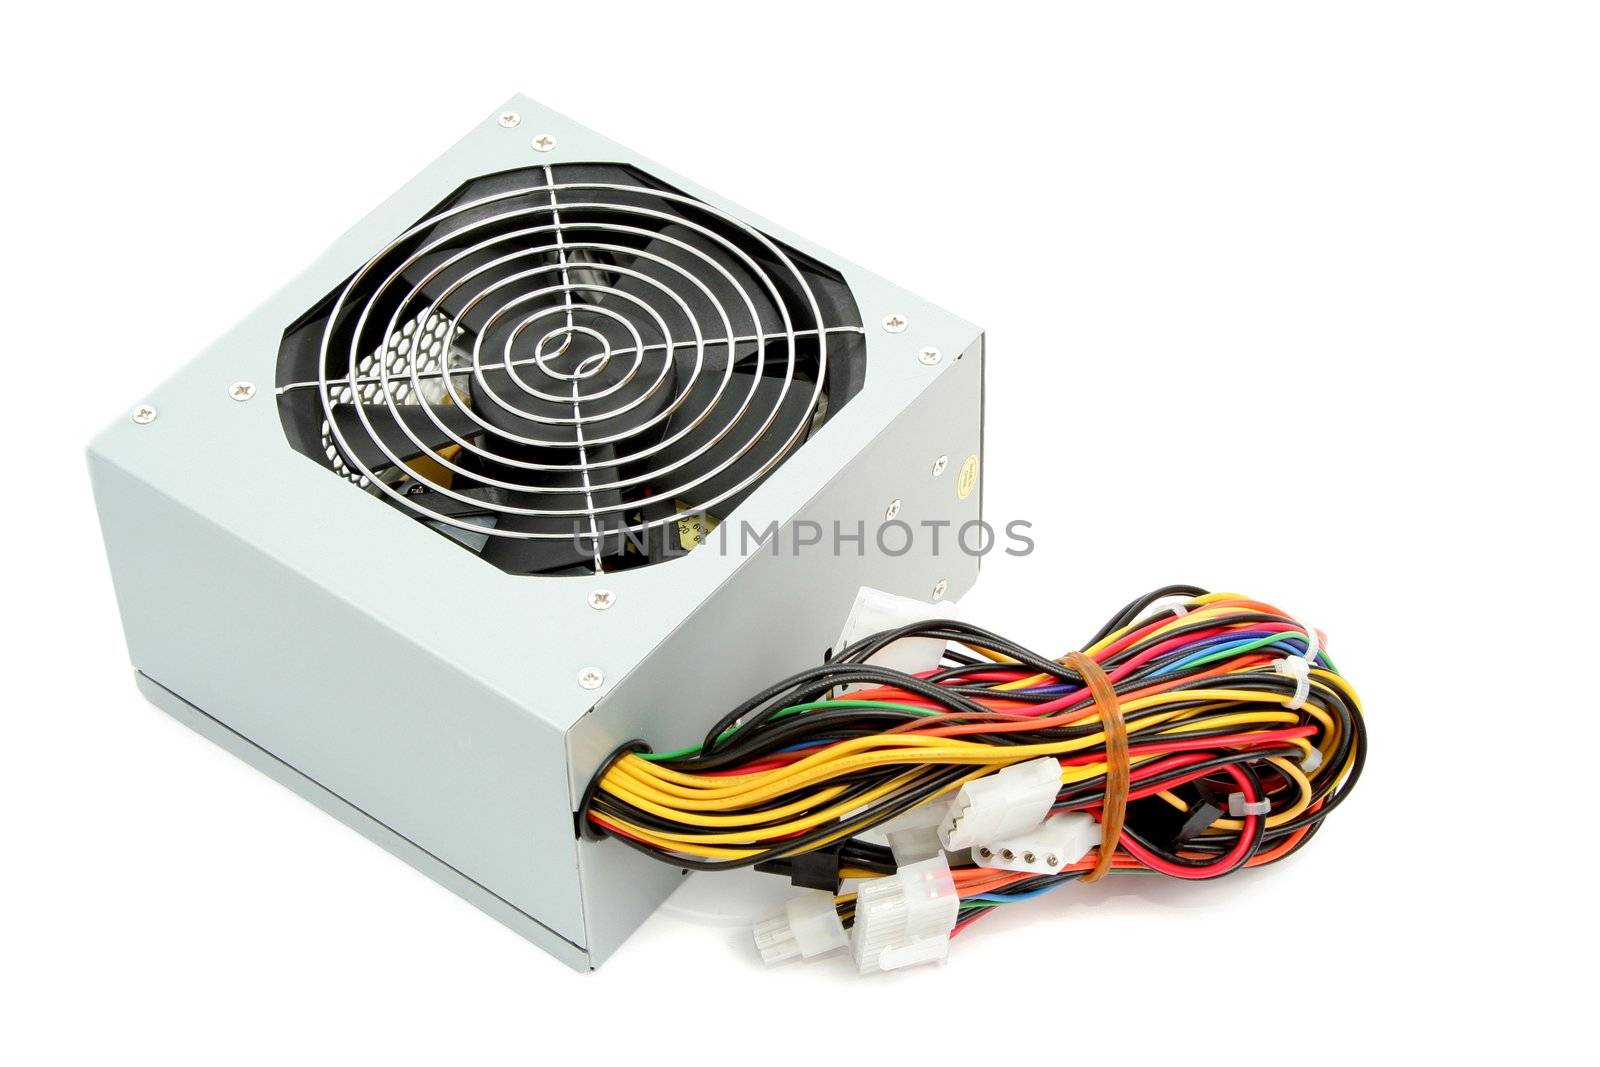 Computer power supply with fan and wires